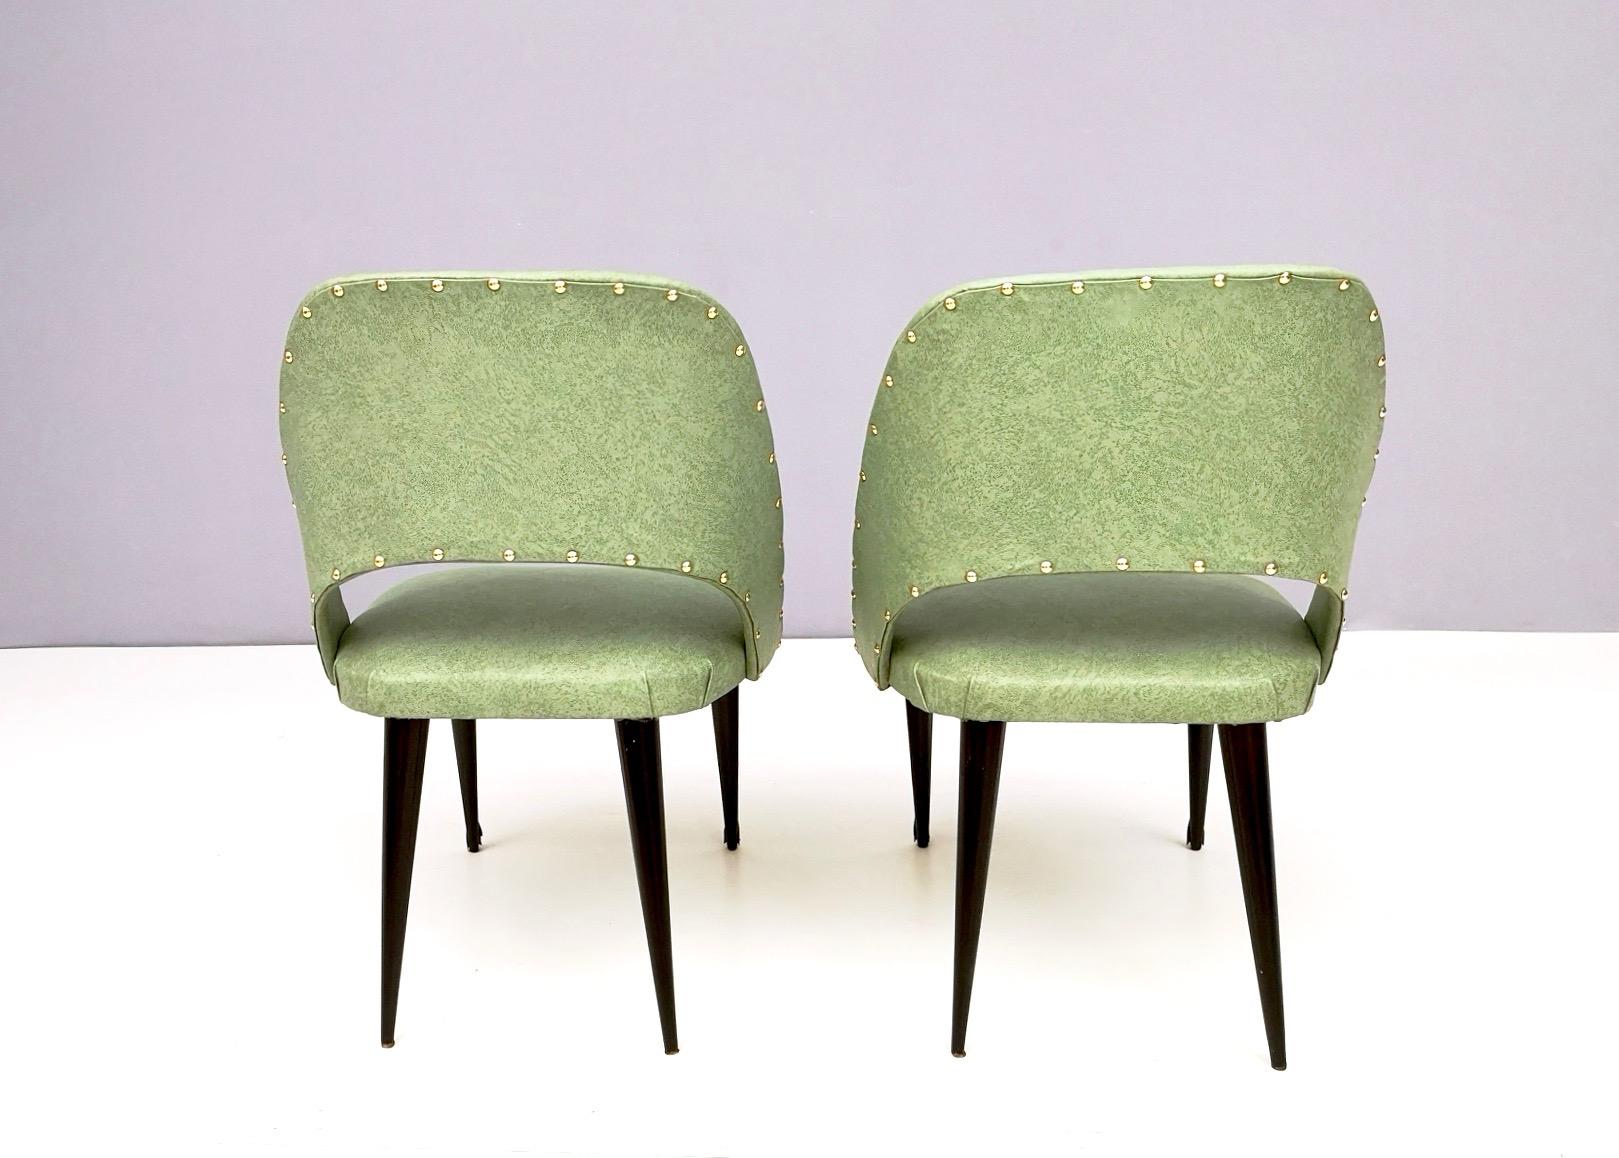 Mid-20th Century Pair of Vintage Green Skai Side Chairs with Ebonized Wood Legs, Italy For Sale